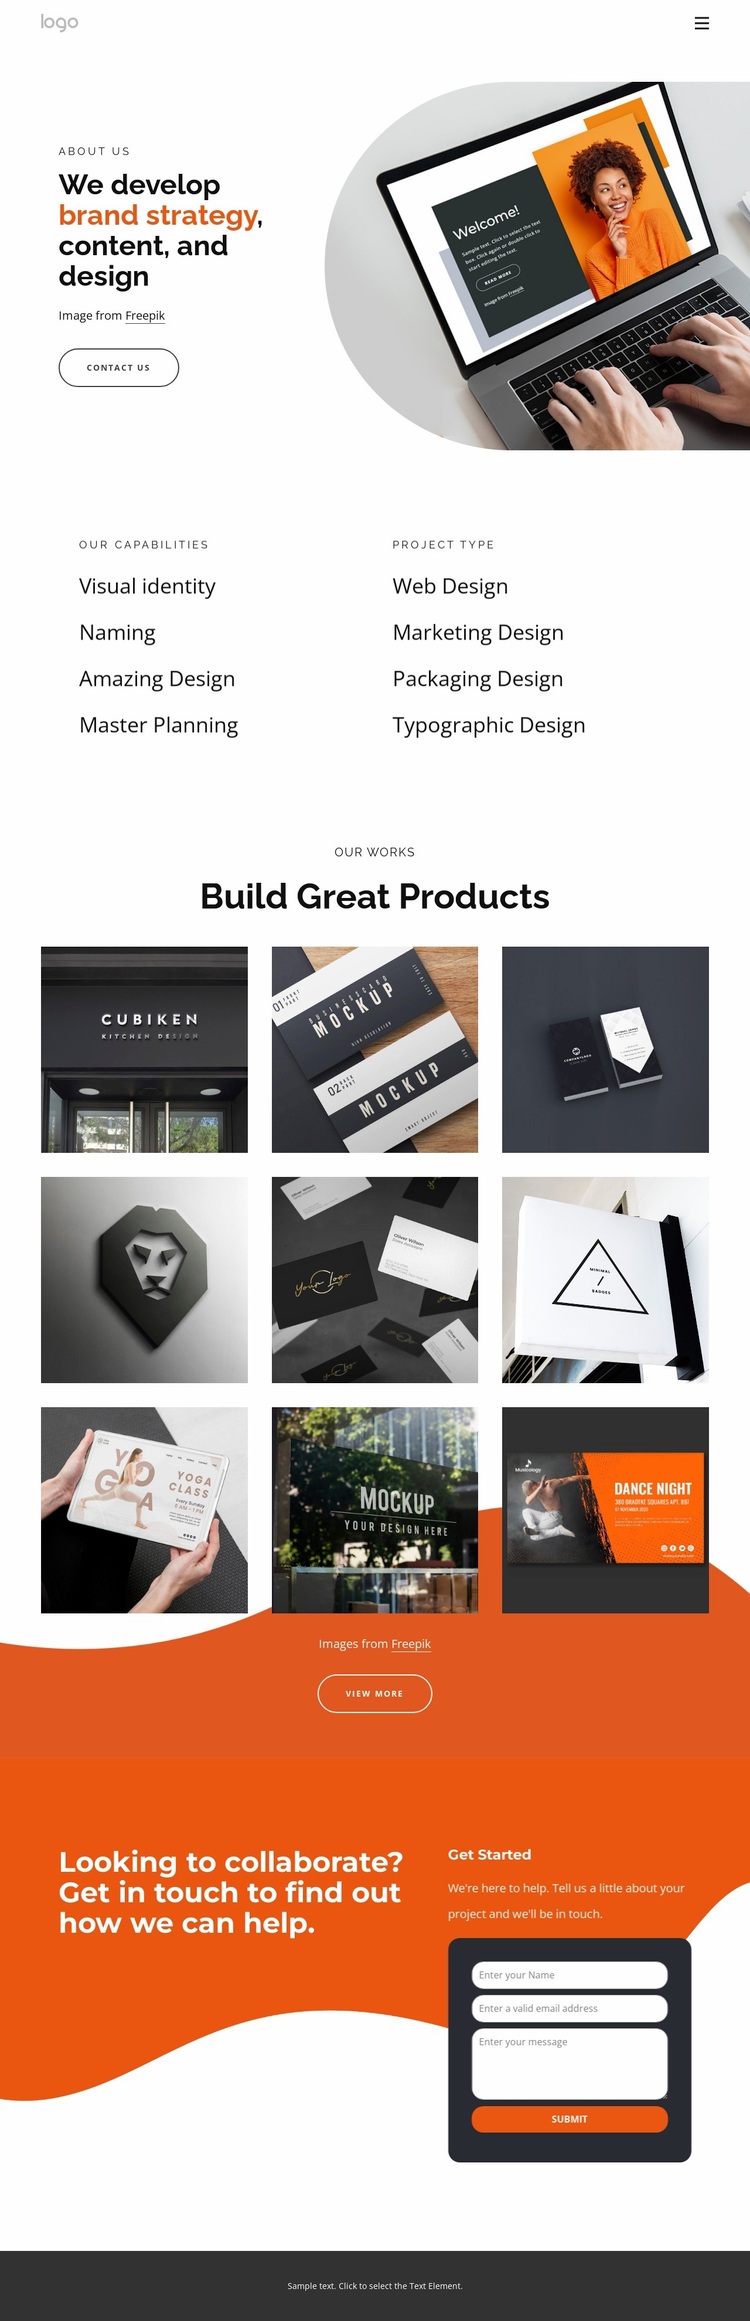 We create thoughtful experiences for humans Website Design